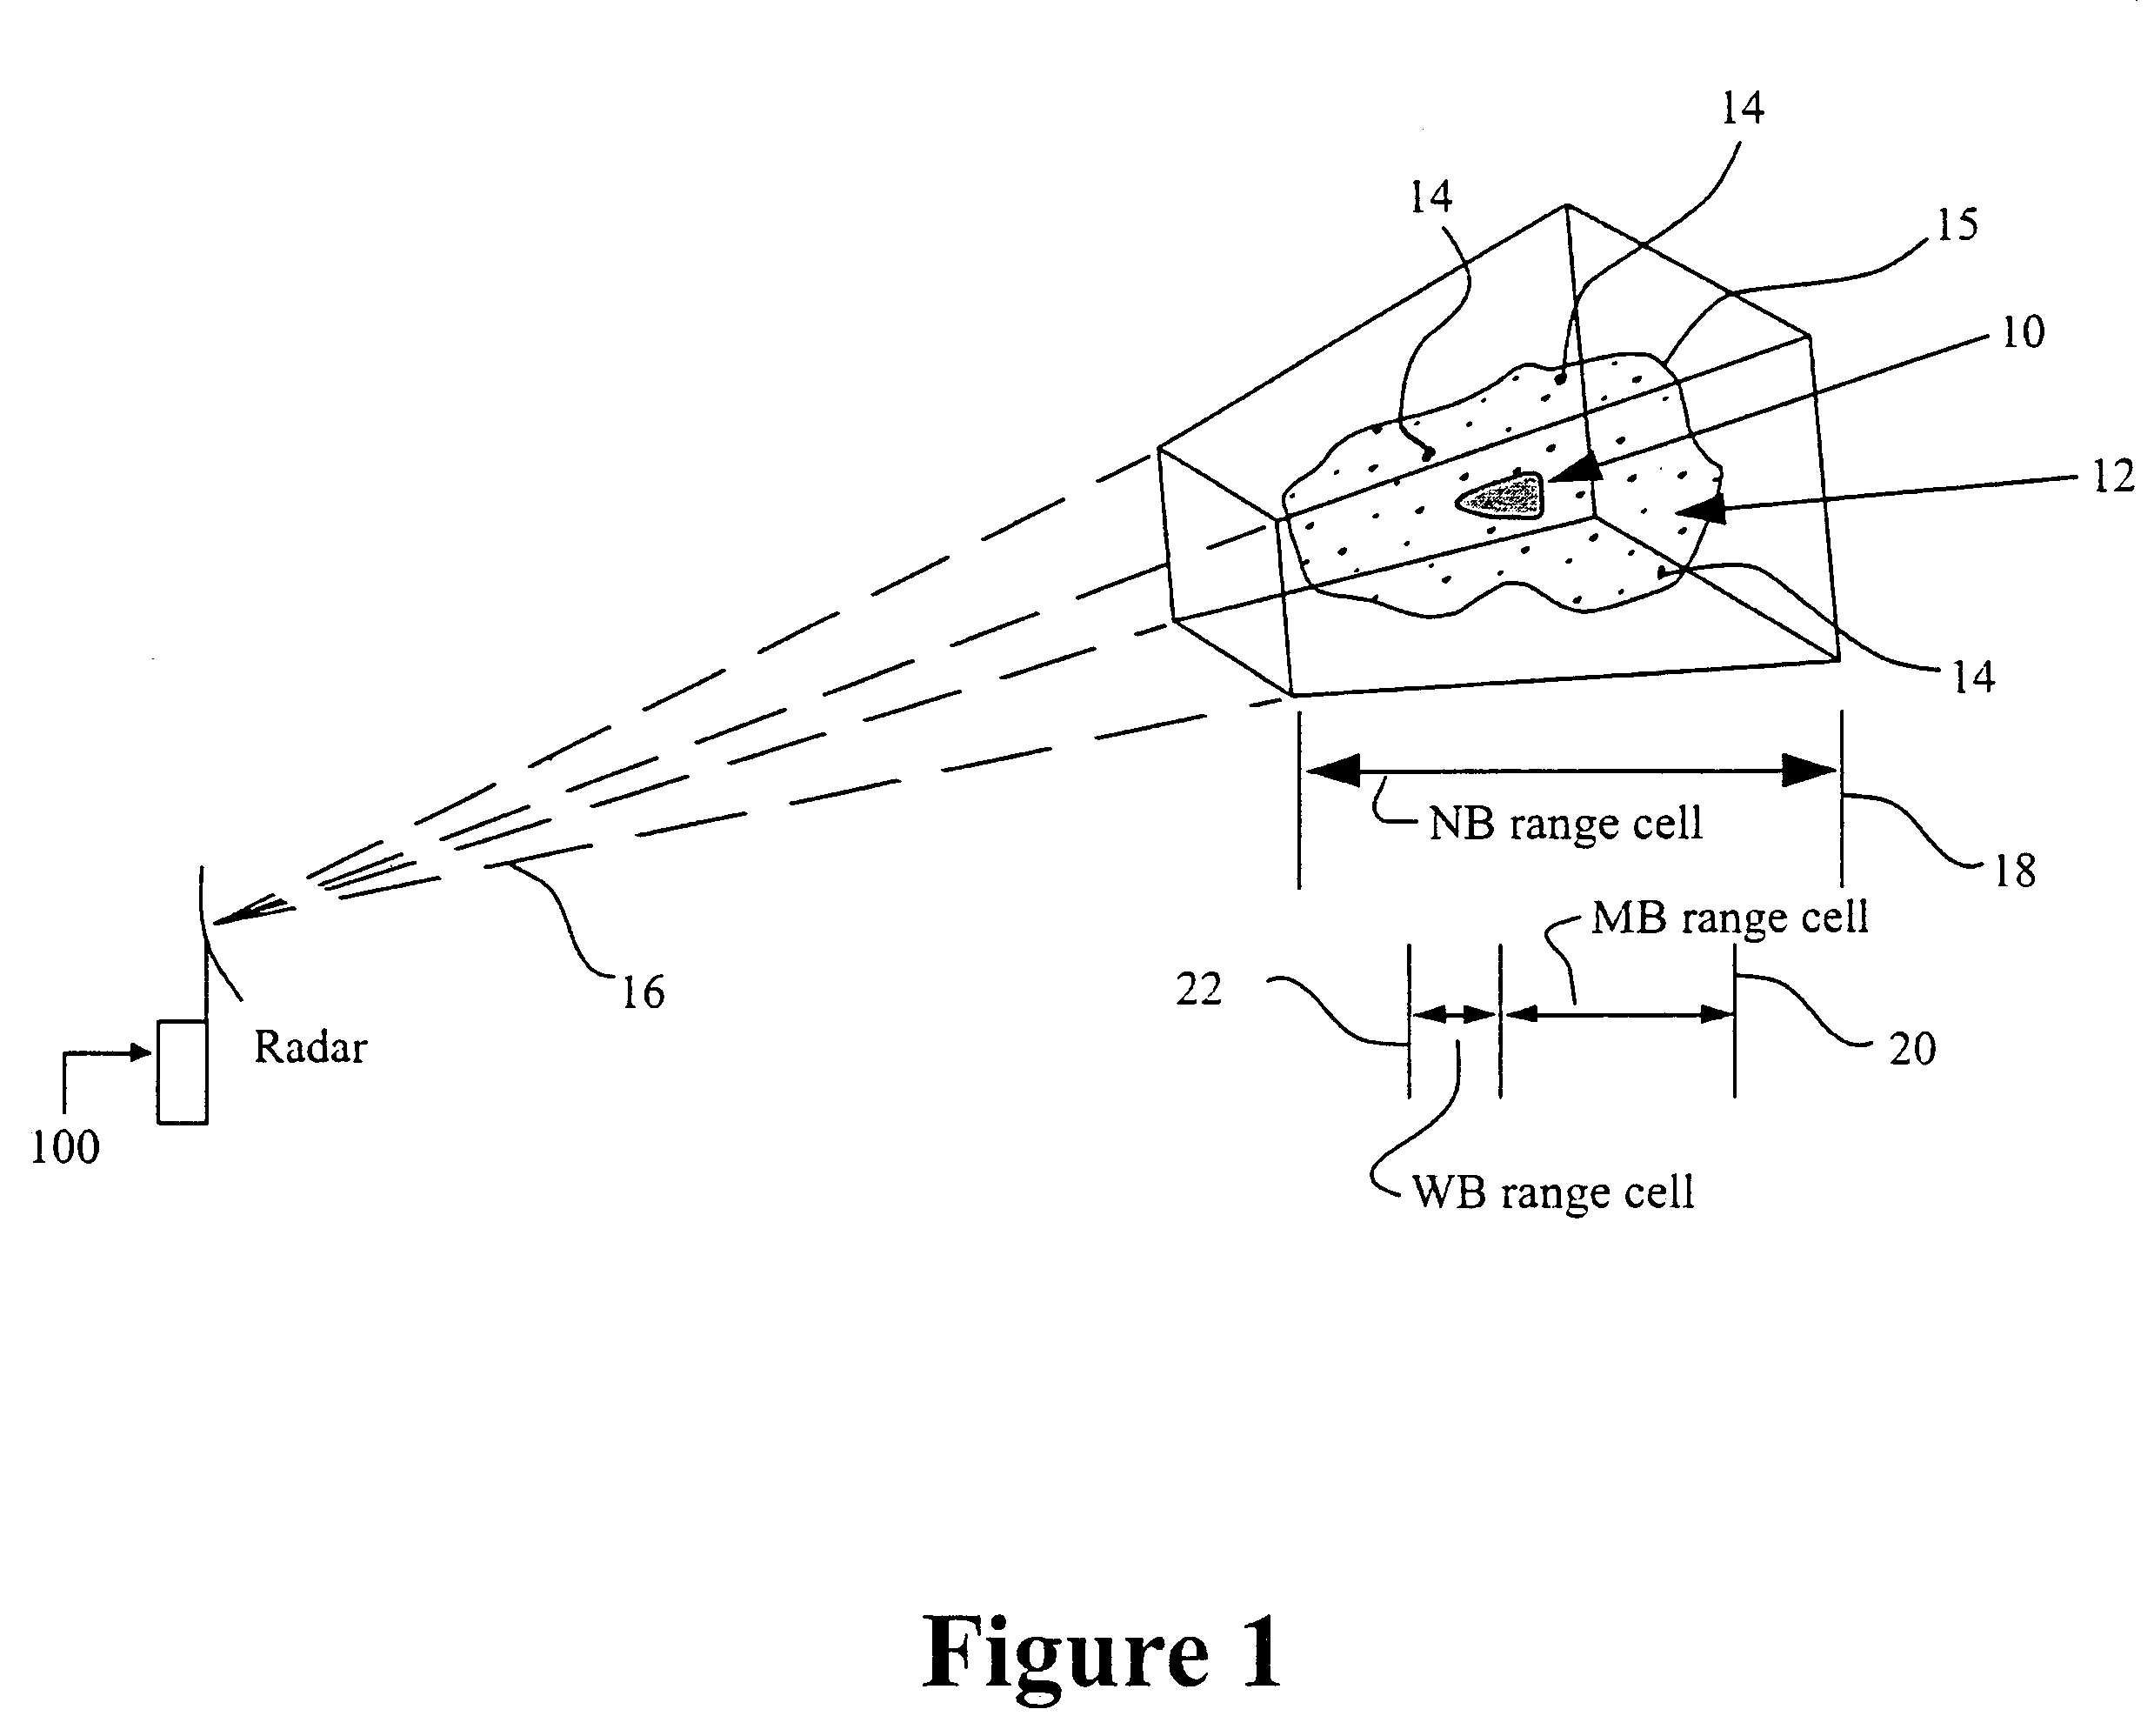 Method and device for the detection and track of targets in high clutter